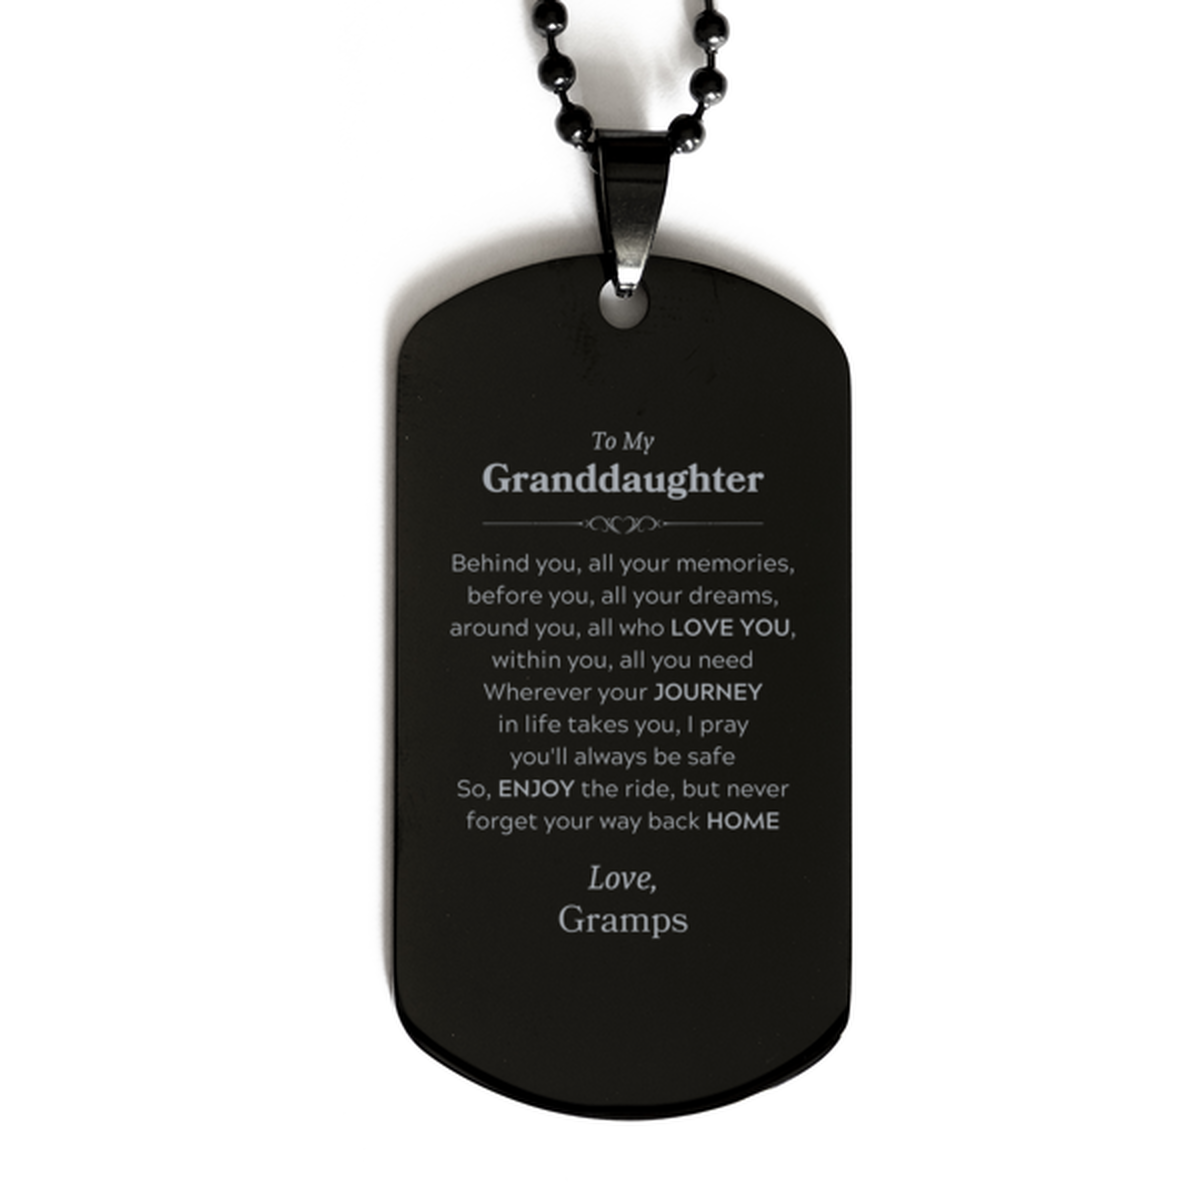 To My Granddaughter Graduation Gifts from Gramps, Granddaughter Black Dog Tag Christmas Birthday Gifts for Granddaughter Behind you, all your memories, before you, all your dreams. Love, Gramps